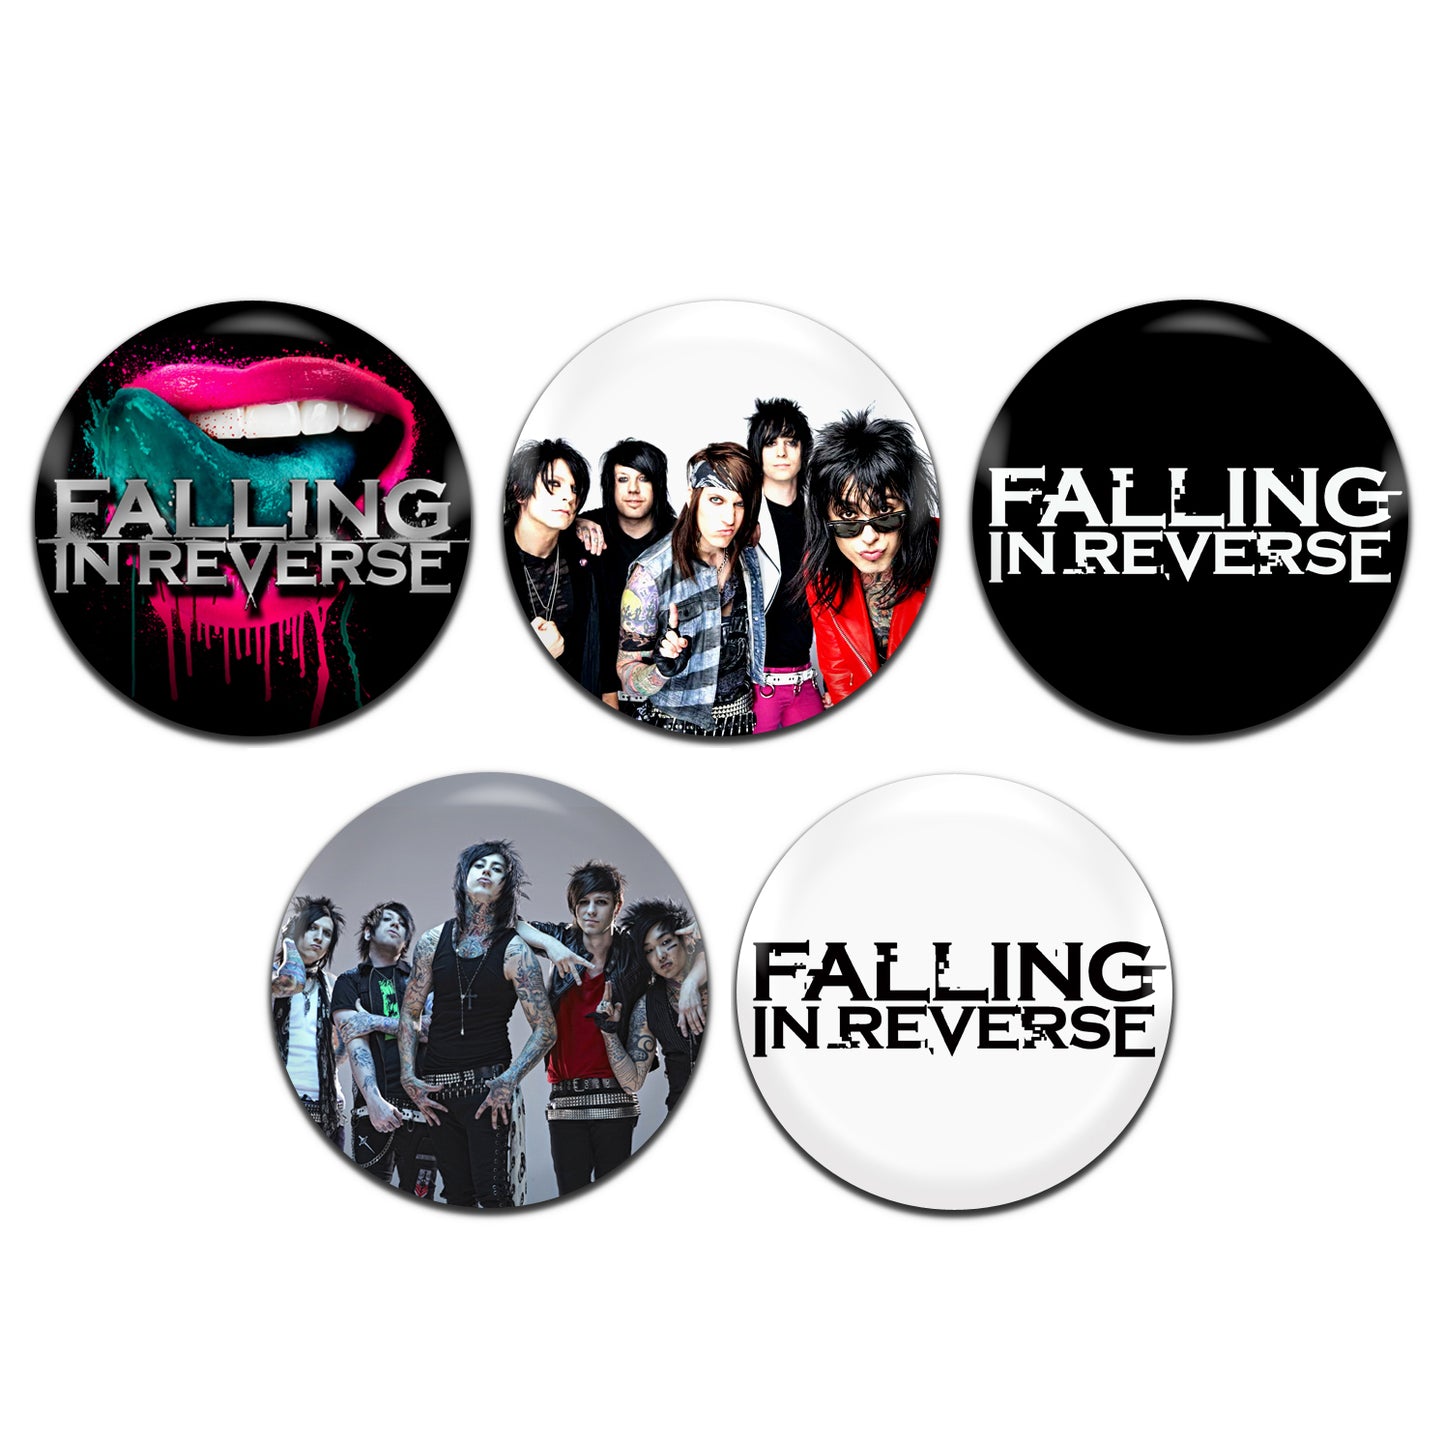 Falling In Reverse Metalcore Post Hardcore Rock Metal Band 00's 25mm / 1 Inch D-Pin Button Badges (5x Set)